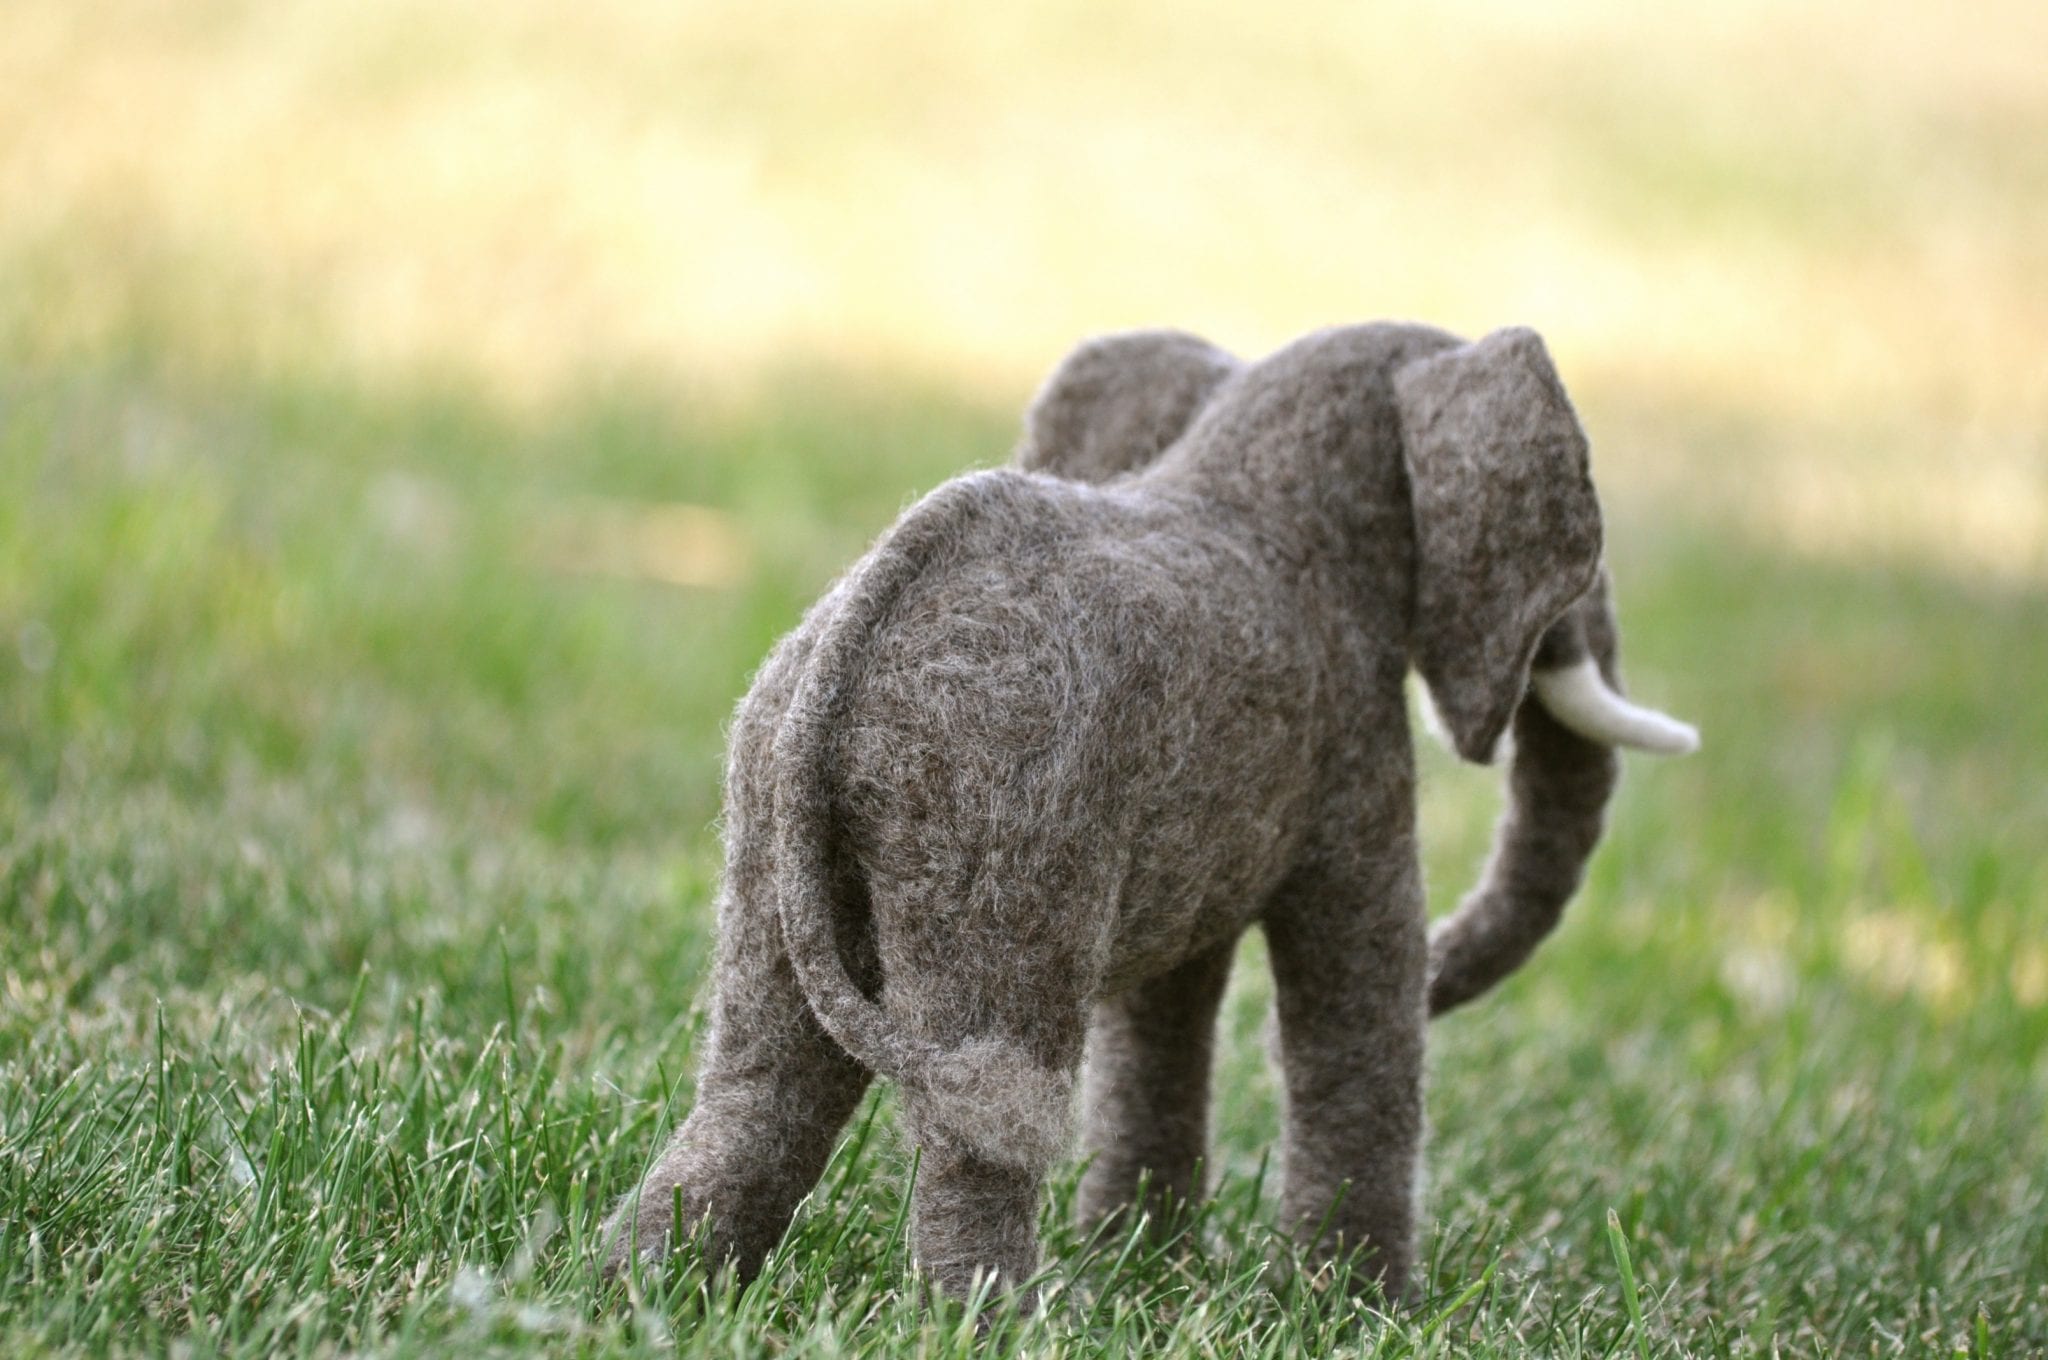 My little needle felted Pachyderm. The story behind the sculpture.